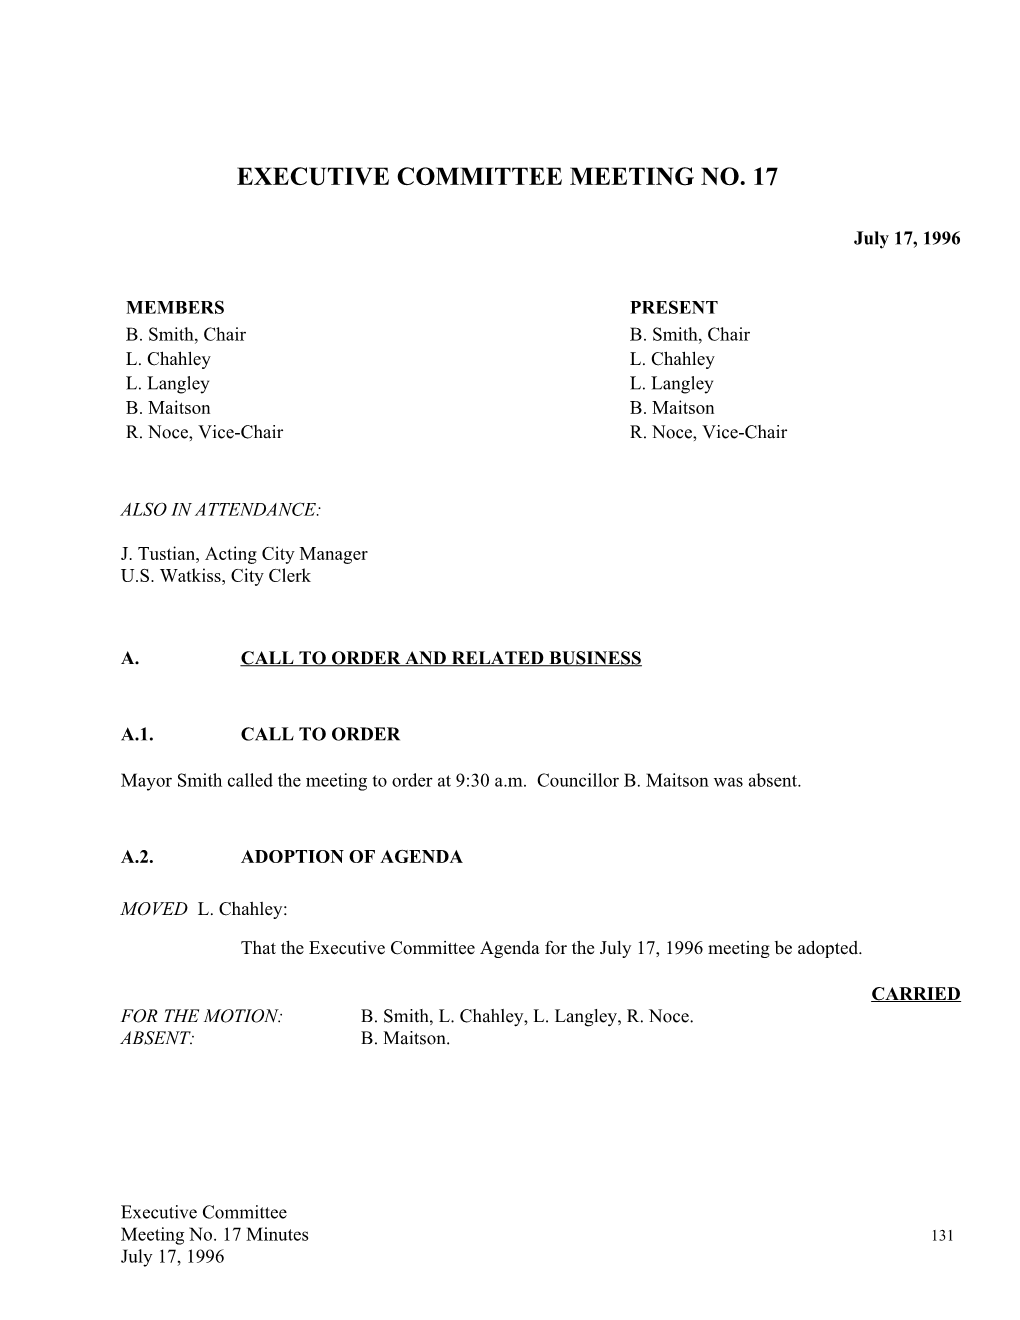 Executive Committee Meeting No. 17